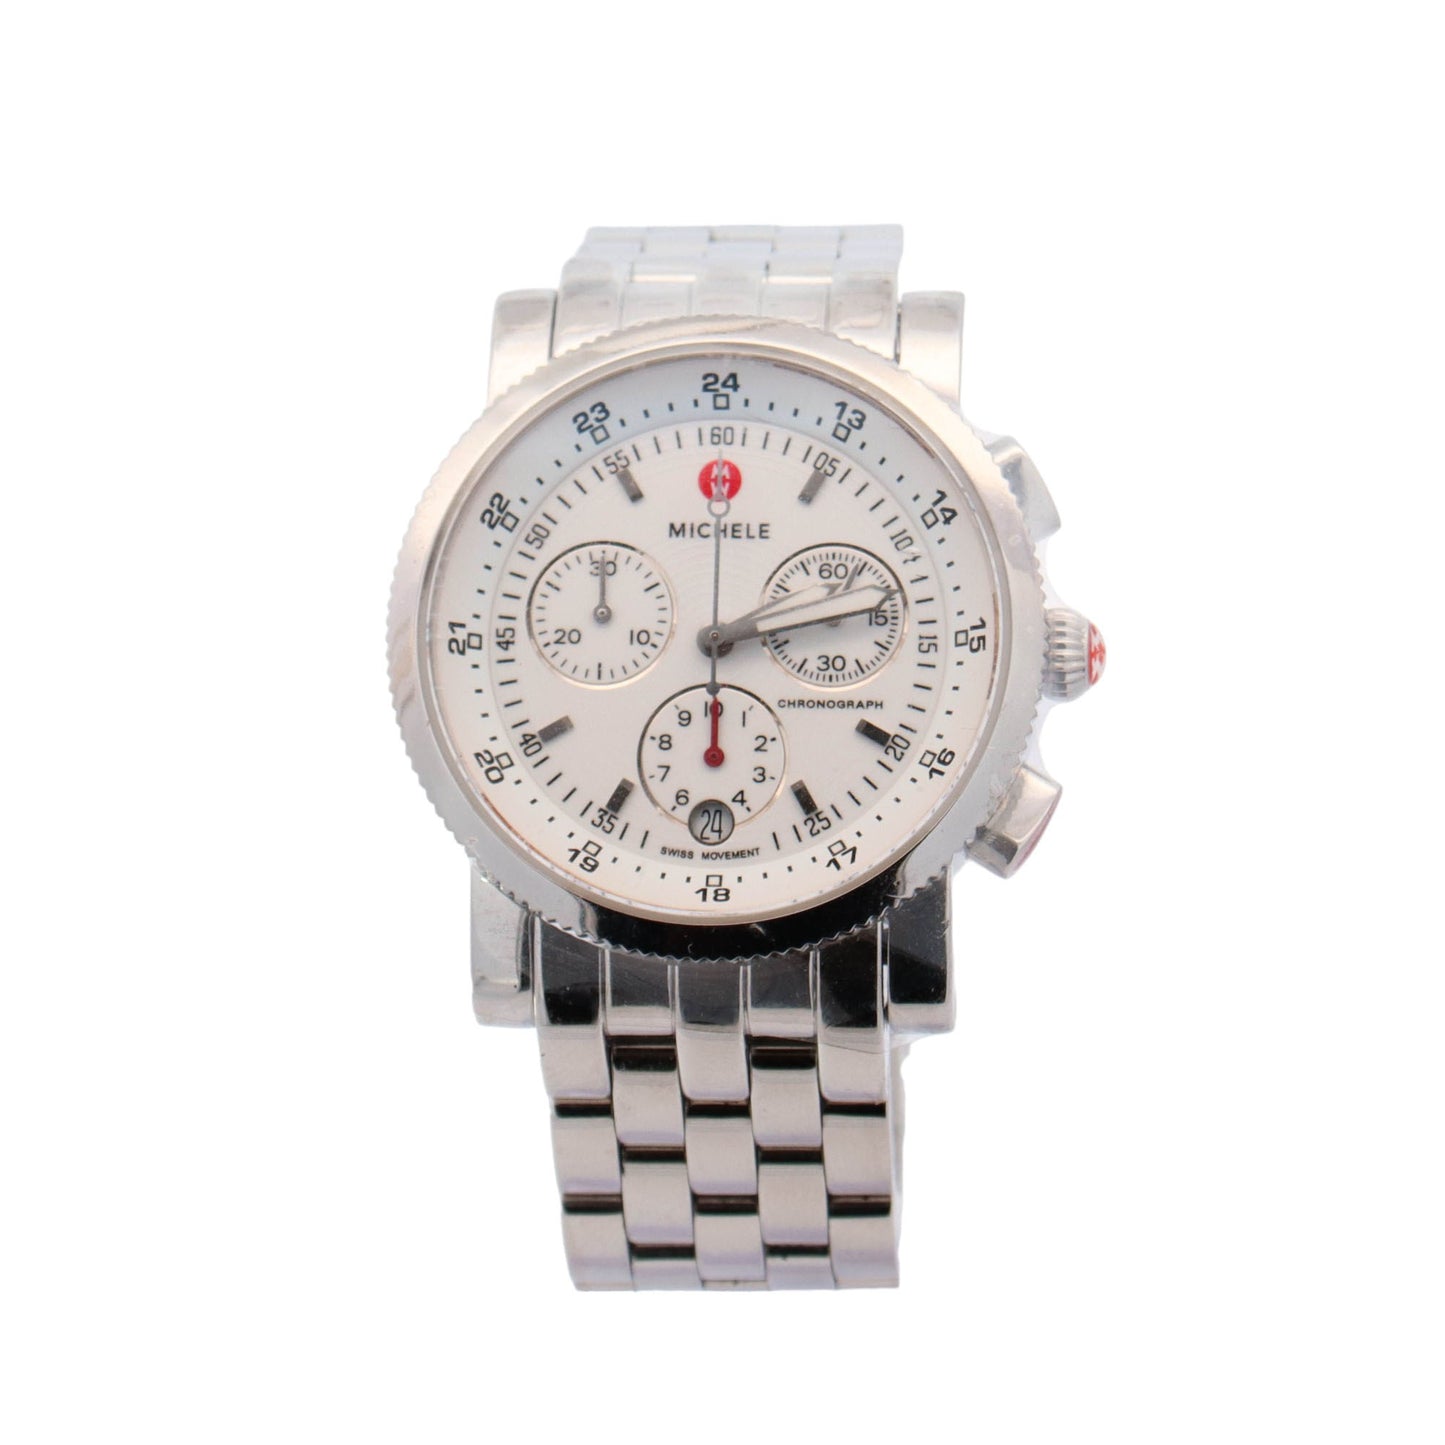 Michele Sport Sail Chronograph Stainless Steel 38mm White Chronograph Dial Watch Reference# MW01C00D9001 - Happy Jewelers Fine Jewelry Lifetime Warranty